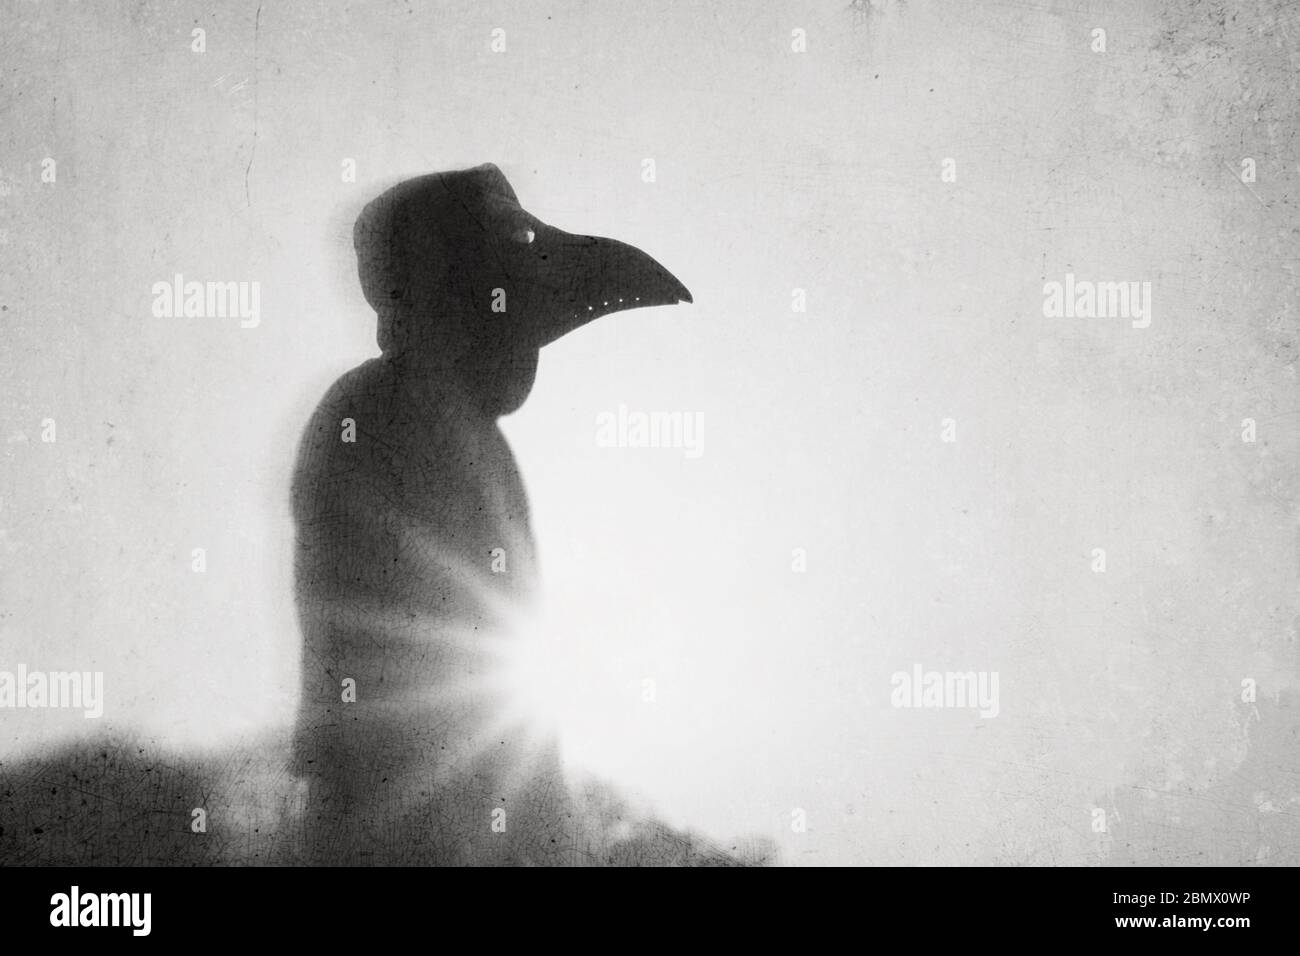 A scary hooded figure with a plague doctor mask, silhouetted against the sunset. With an abstract, experimental, grunge edit. Stock Photo